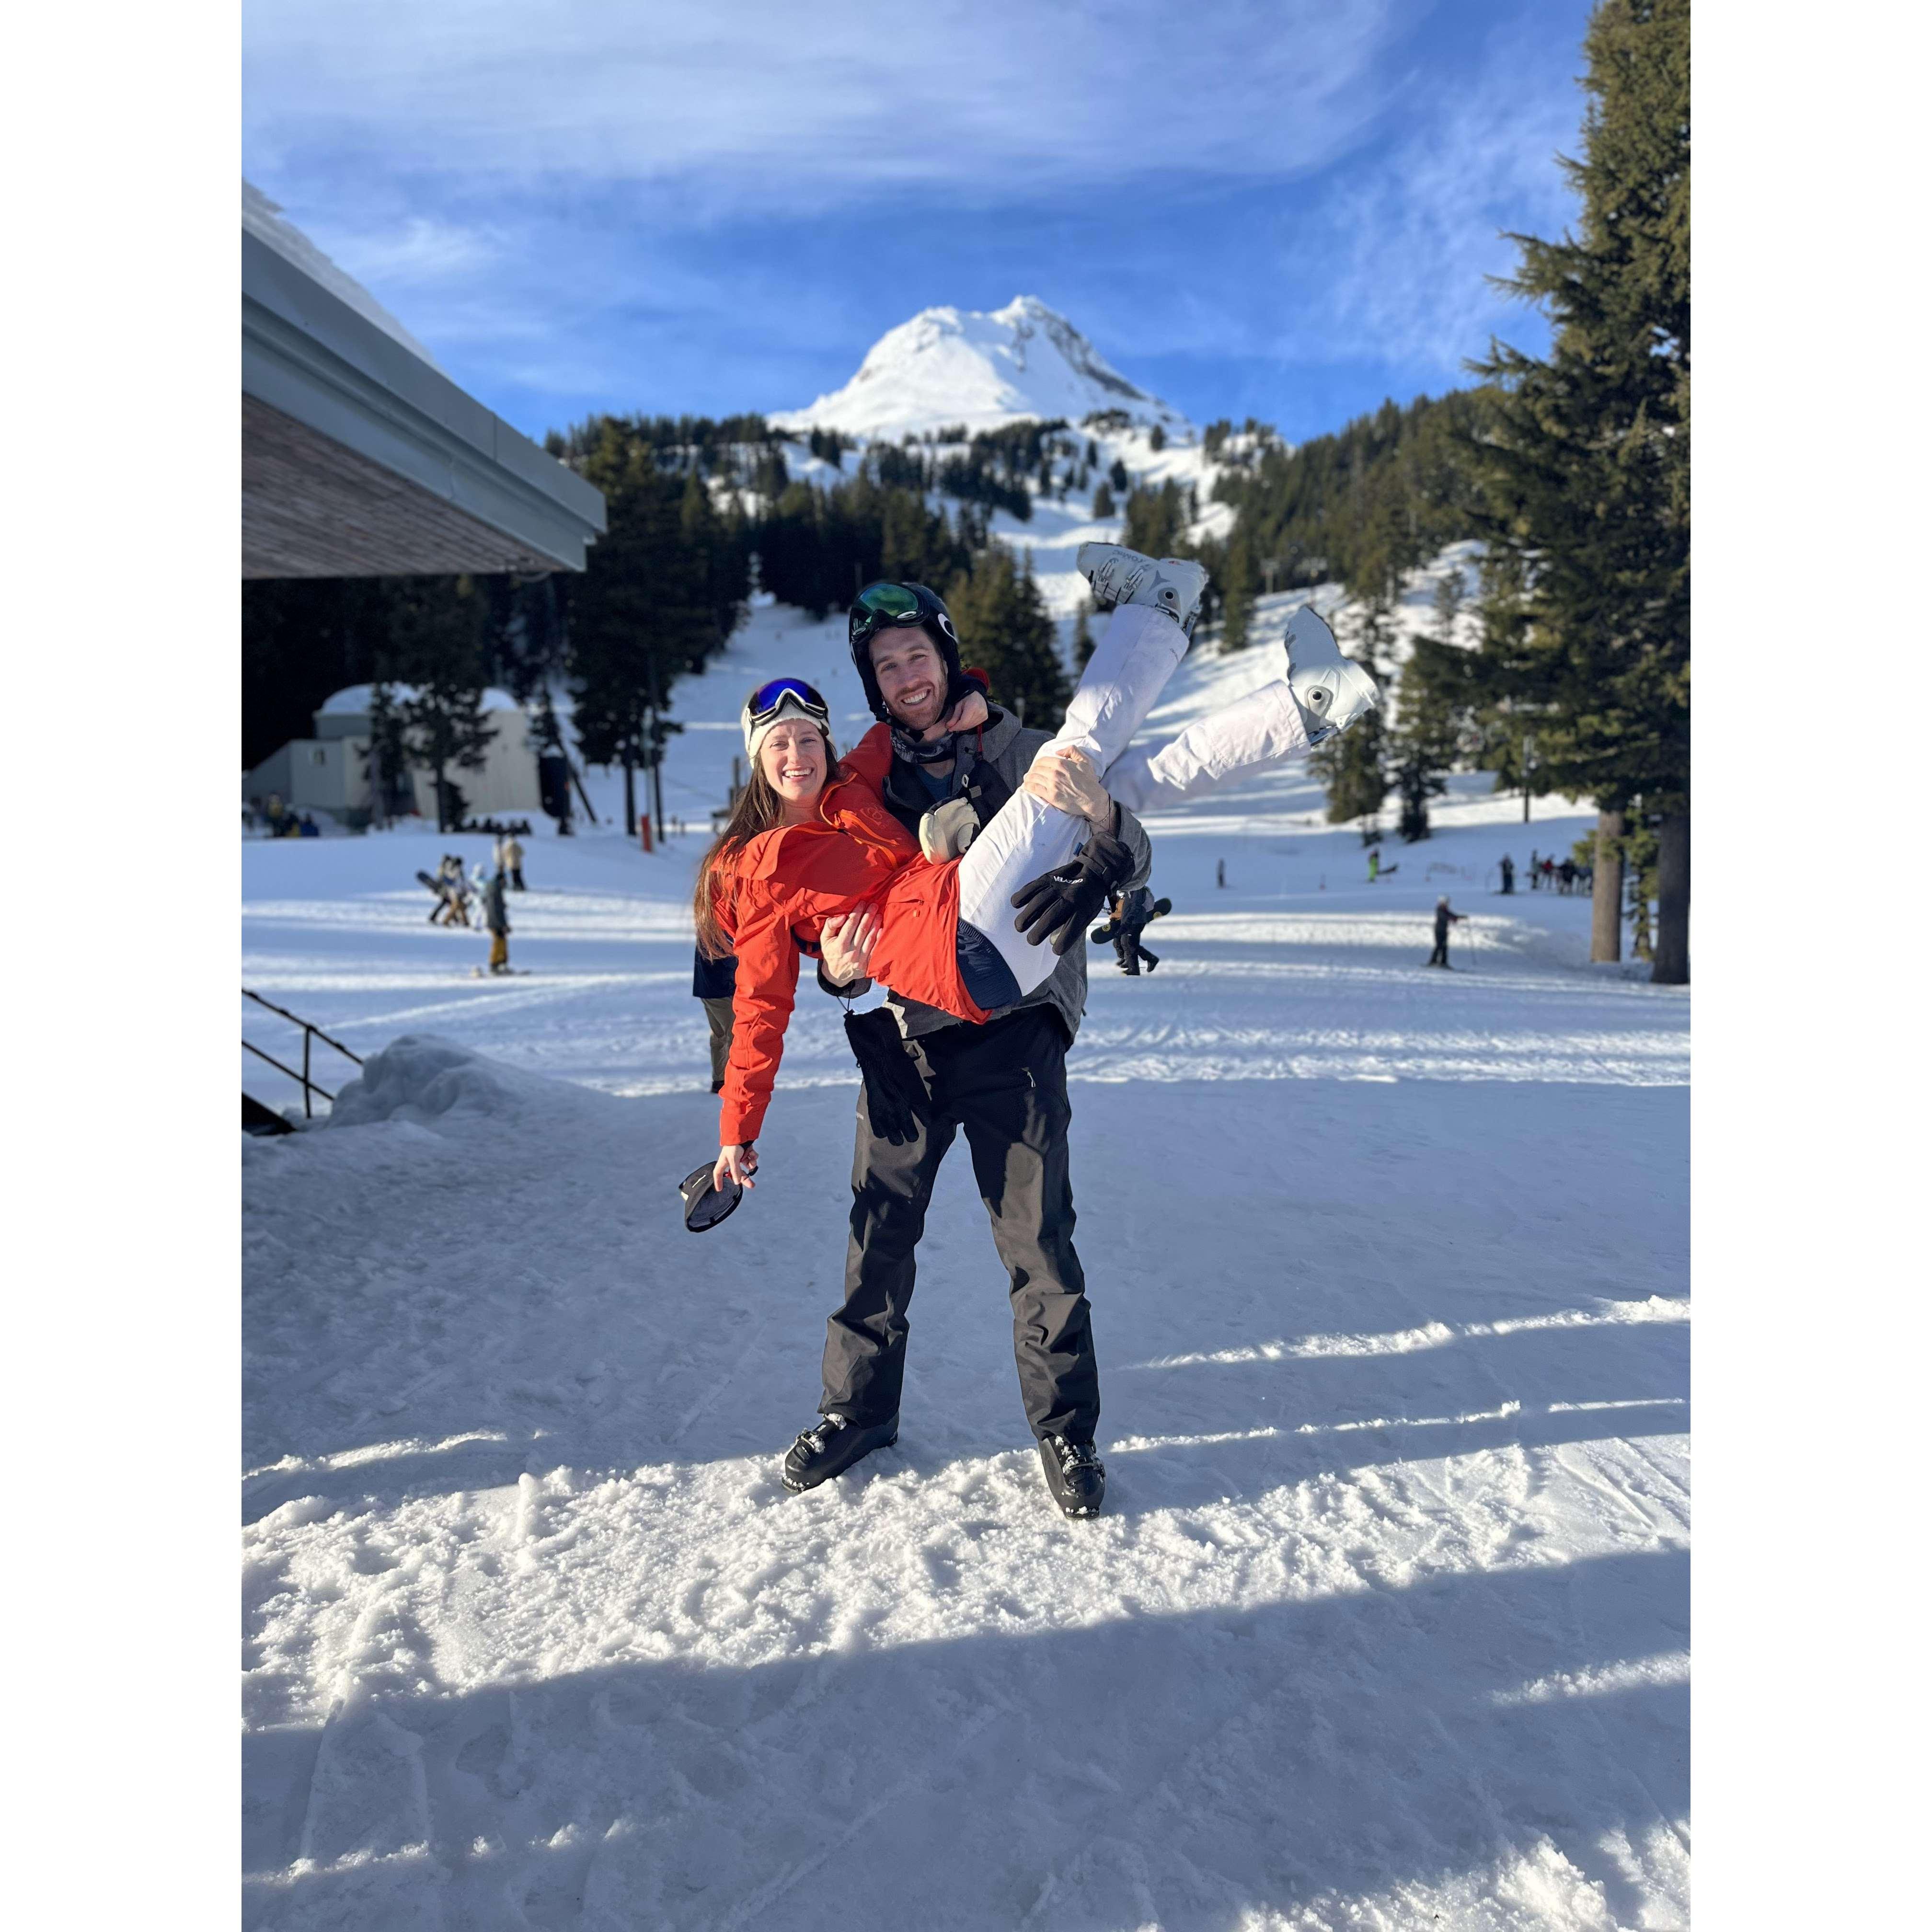 Oran's quickly learning to ski & trying to keep up with his Dooney lass